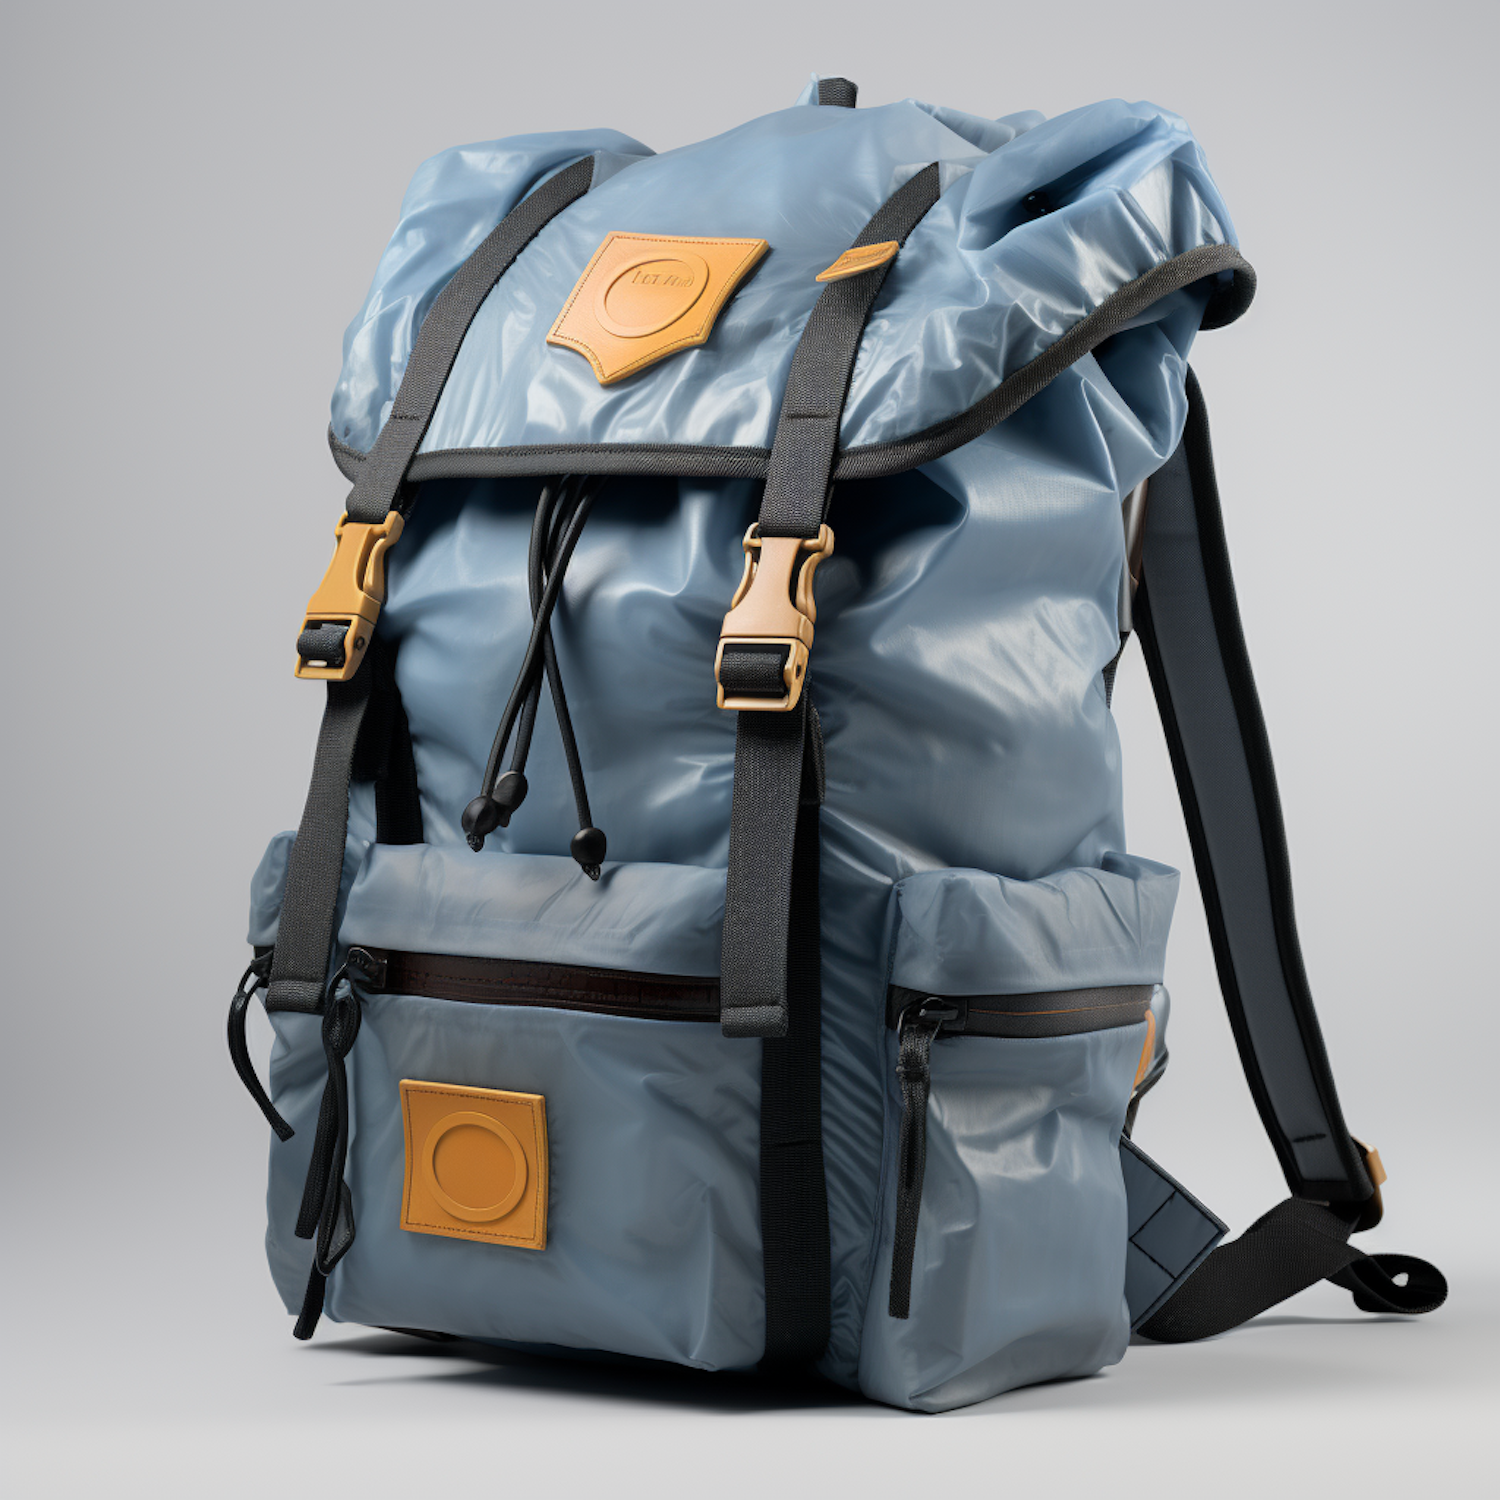 Urban Explorer Waterproof Backpack with Contrasting Yellow Accents